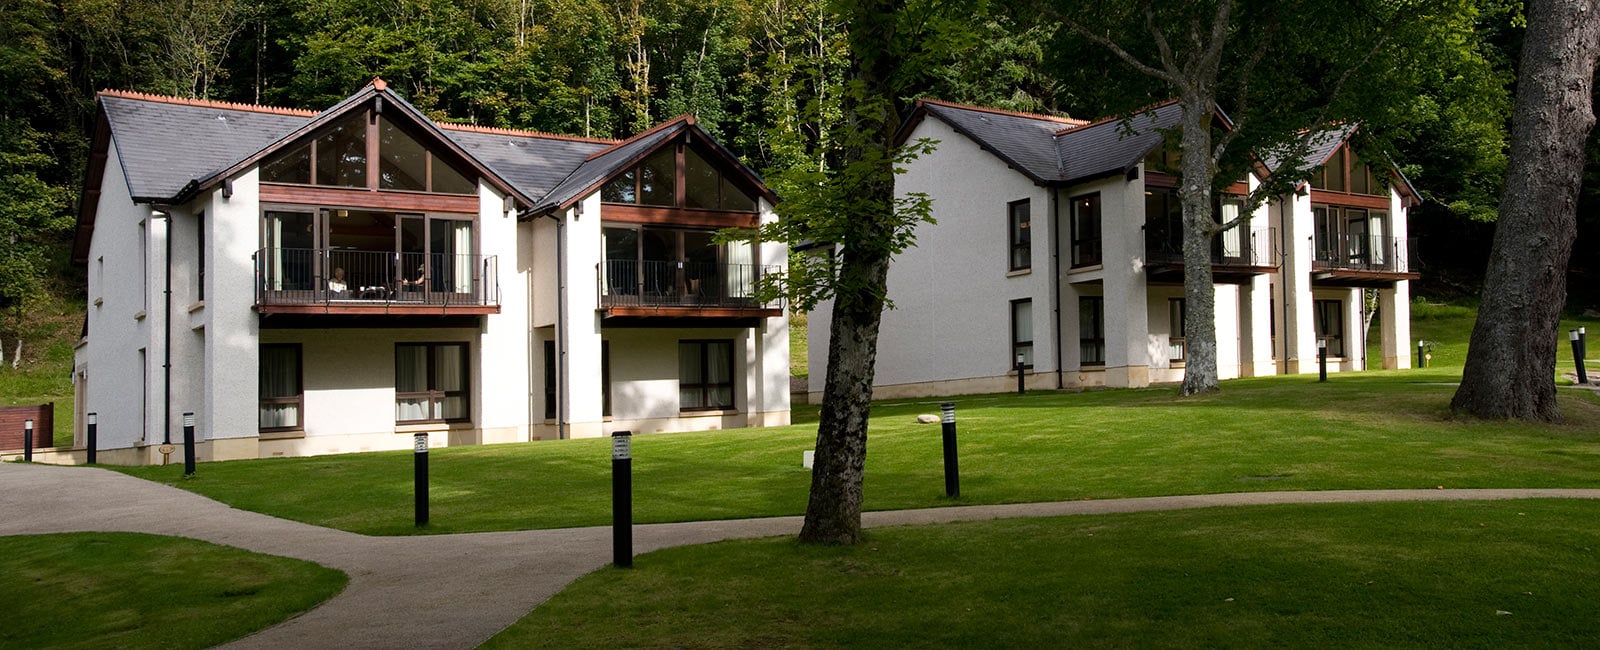 Exterior of Hilton Grand Vacations Club Resort at Dunkeld in Perthshire, Scotland